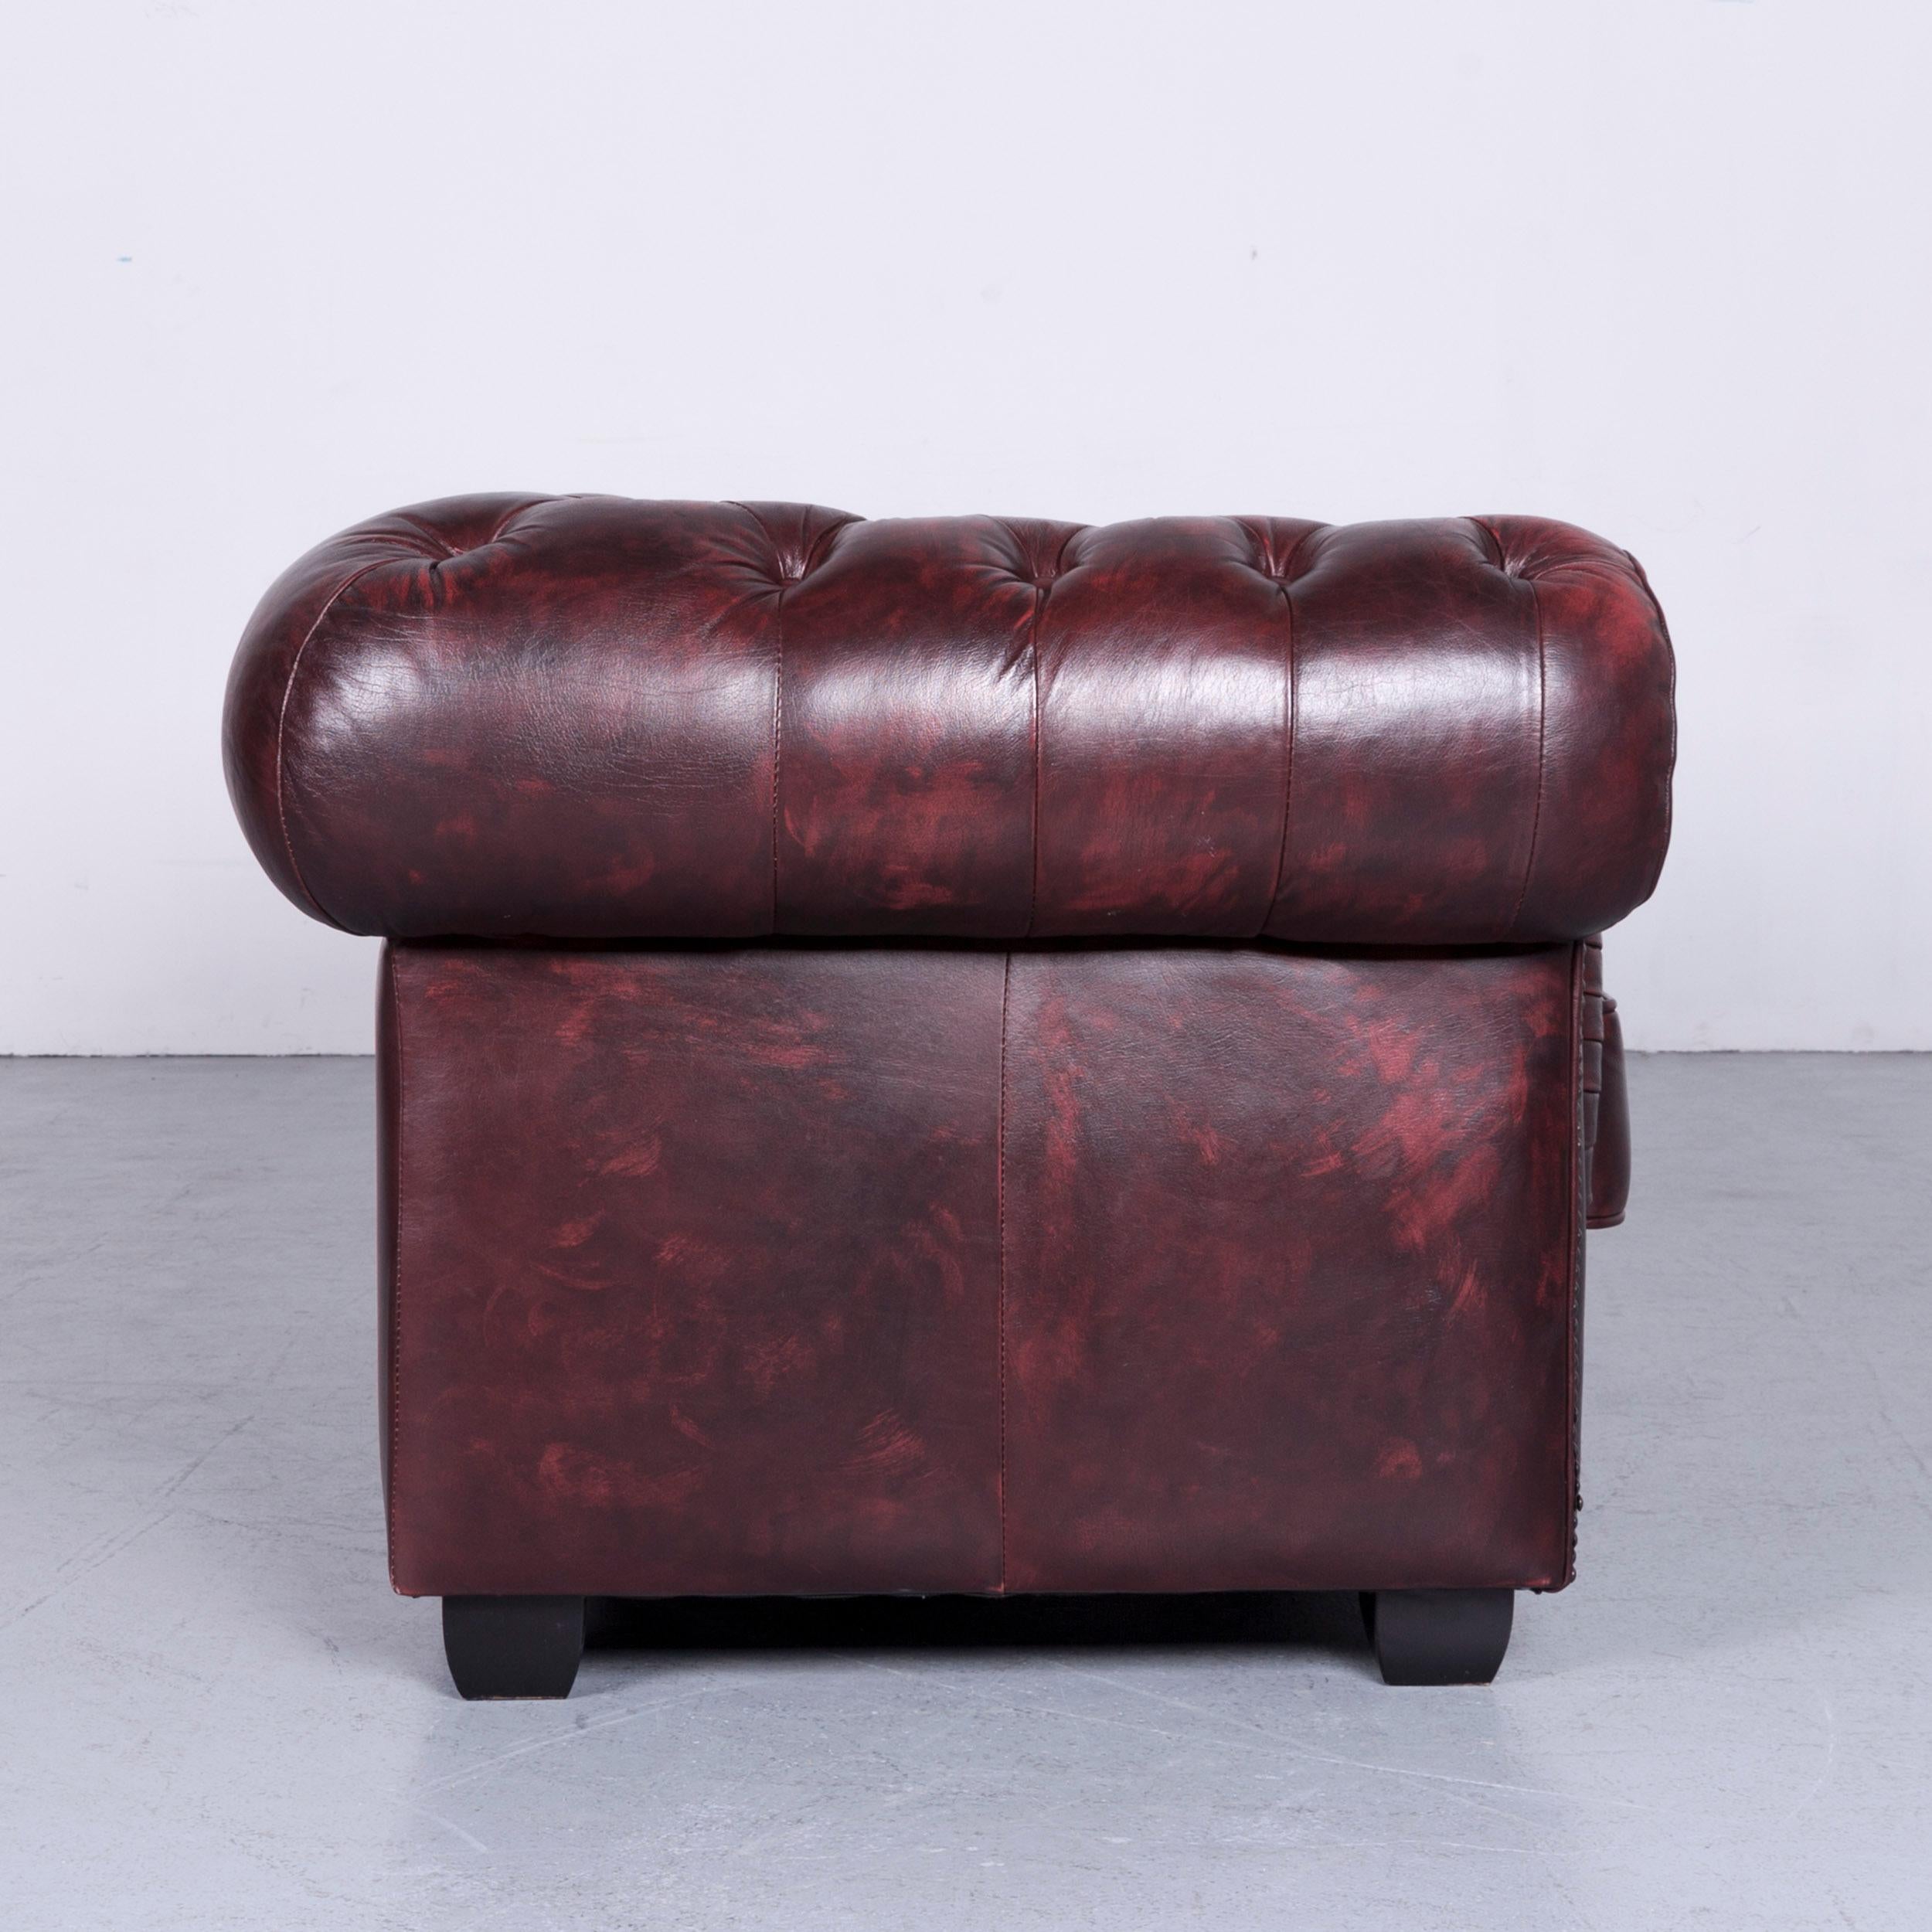 Chesterfield Leather Sofa Brown Three-Seat Couch Vintage Retro 14